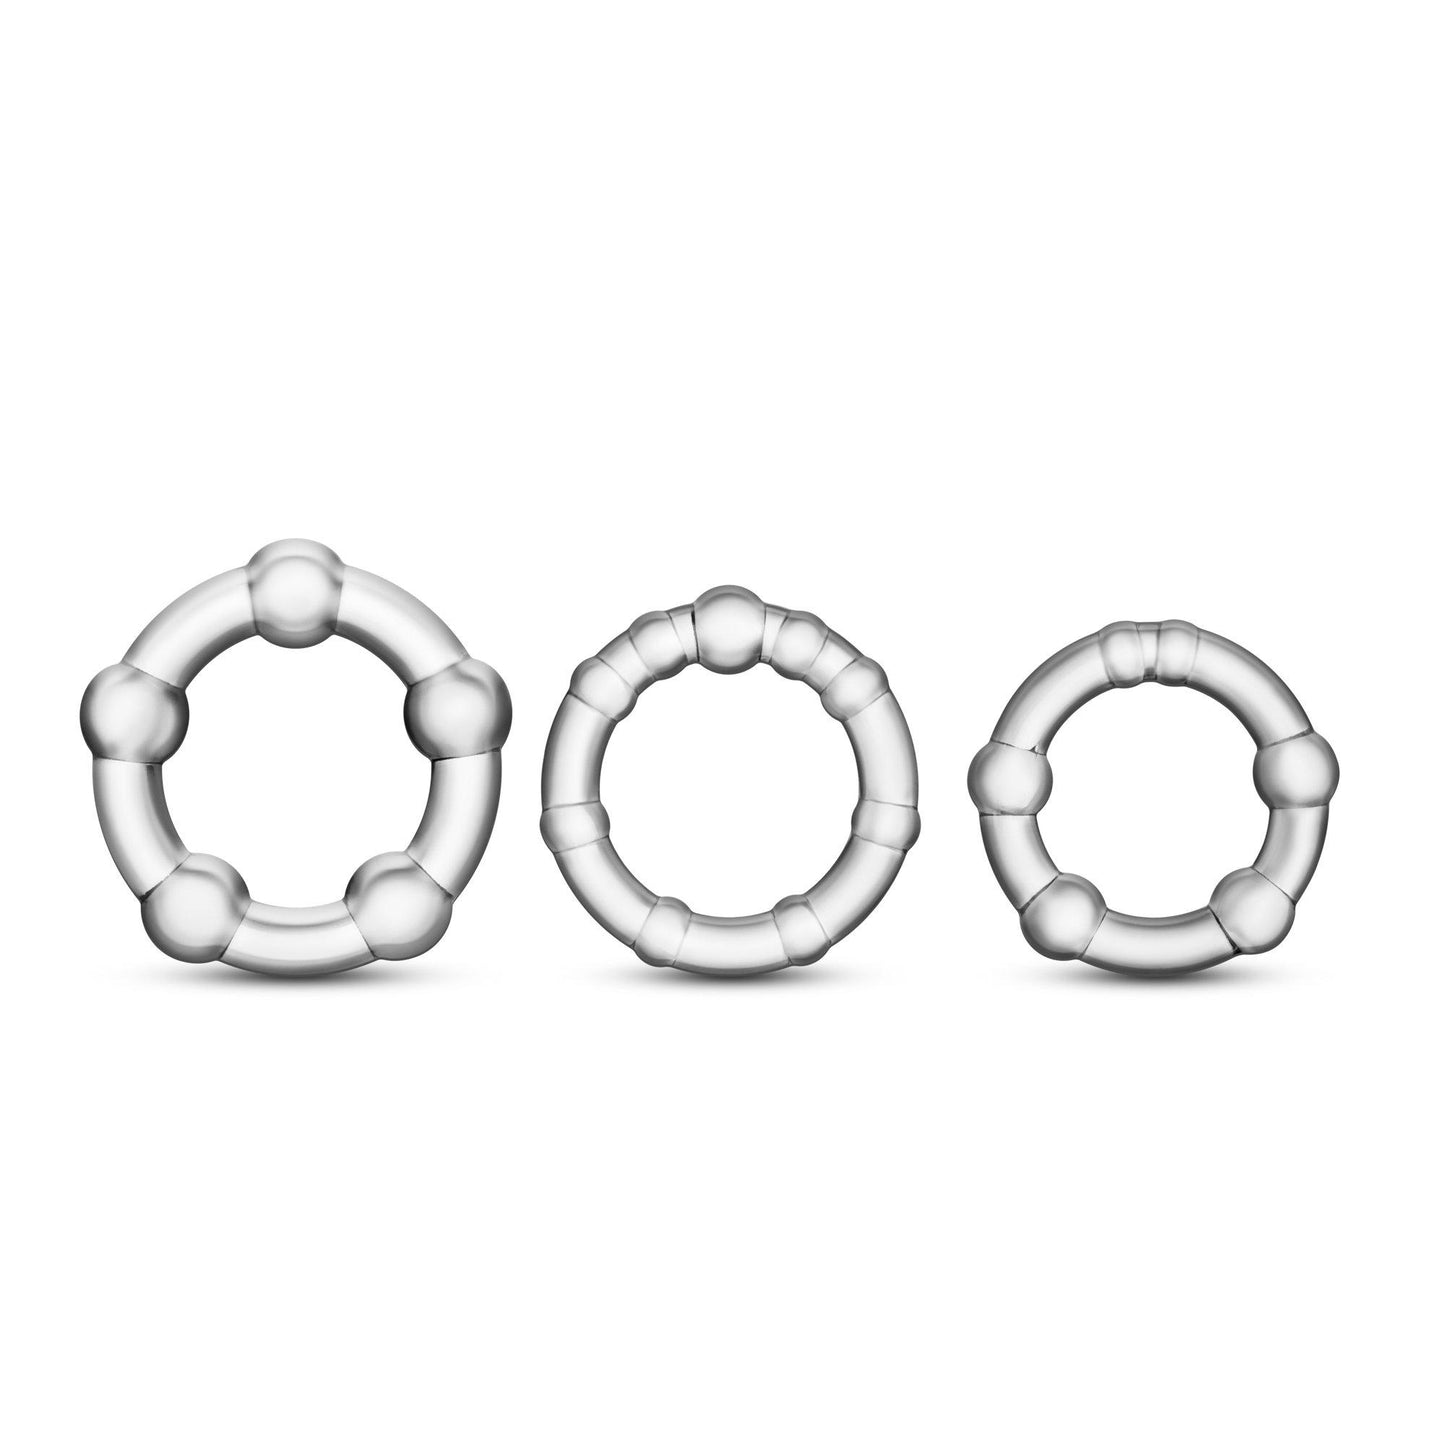 Stay Hard - Beaded Cock Rings - 3 Pack - Clear